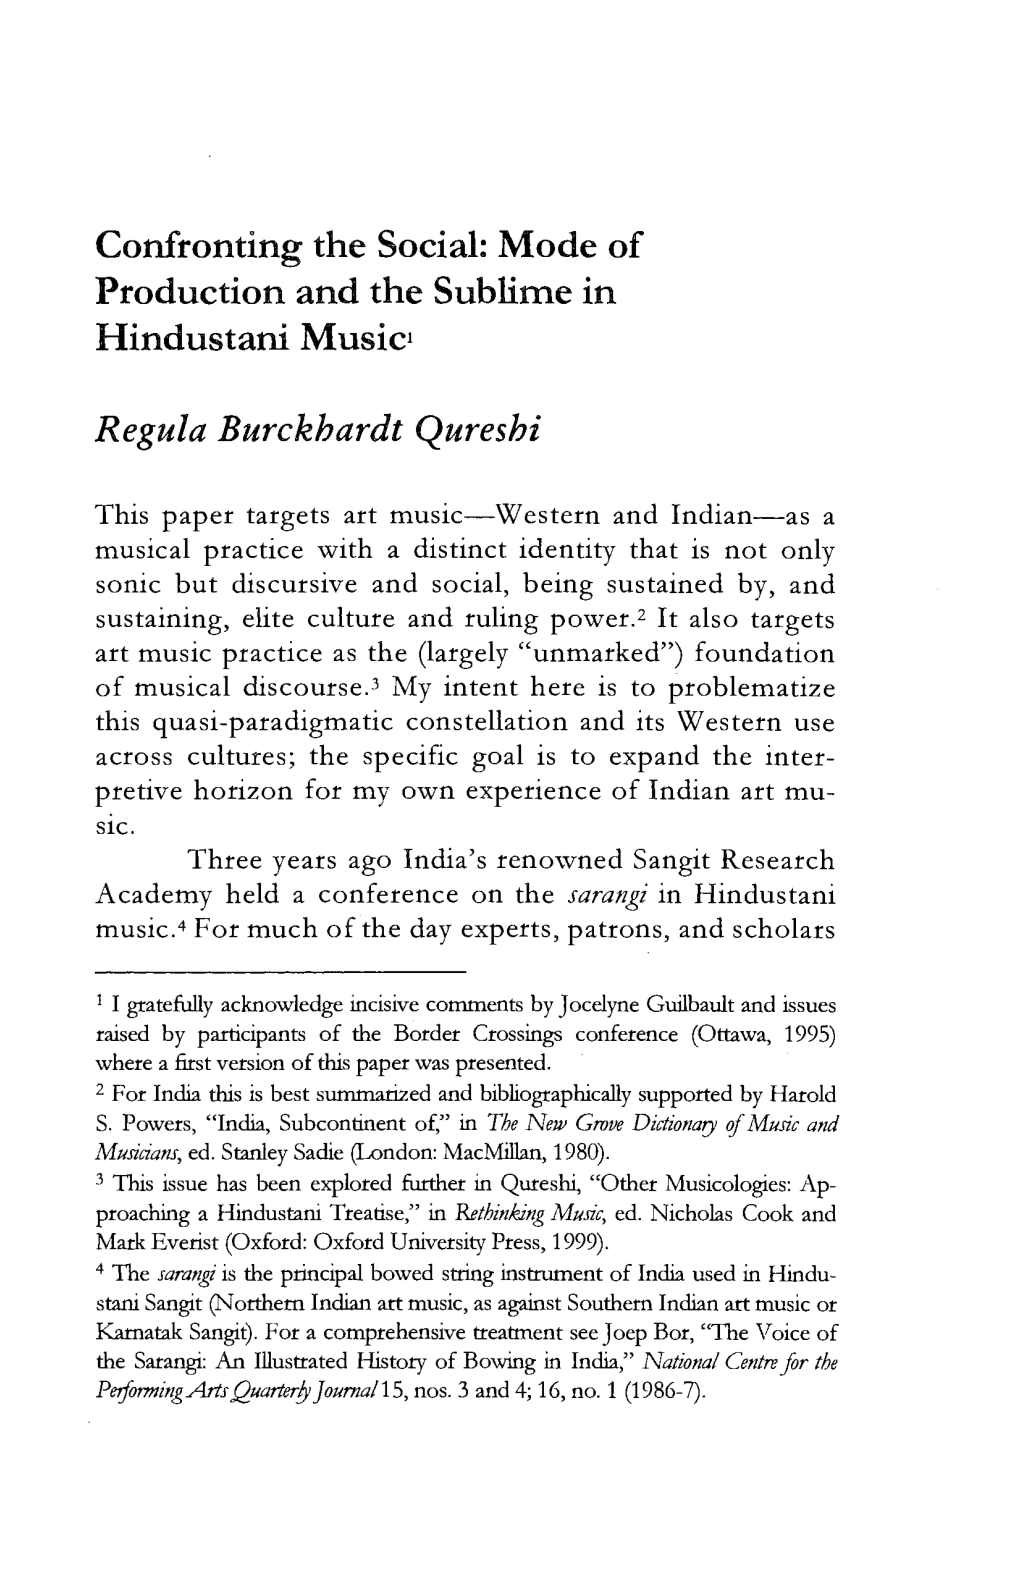 Confronting the Social: Mode of Production and the Sublime in Hindustani Music!